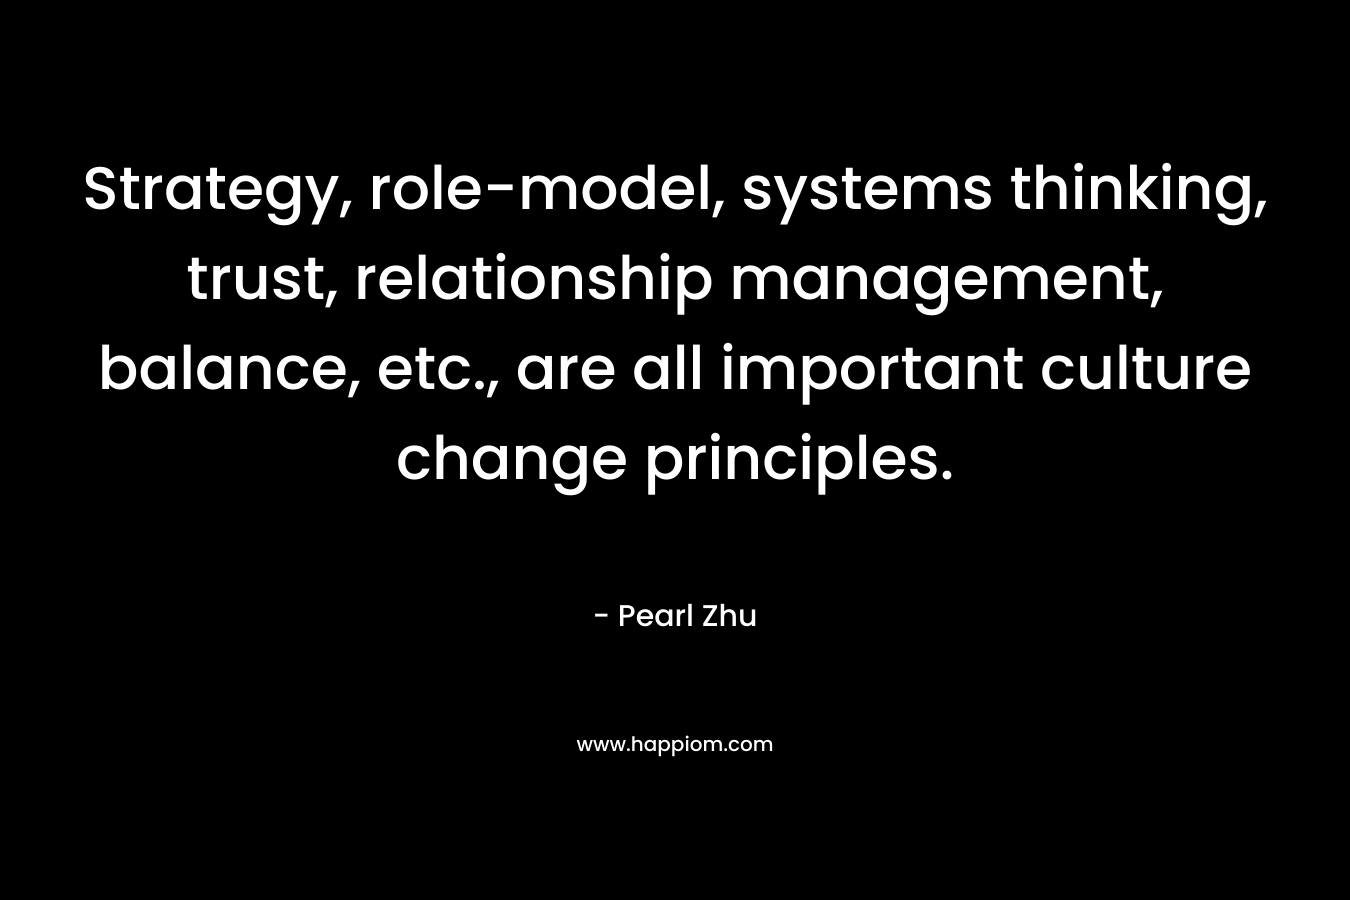 Strategy, role-model, systems thinking, trust, relationship management, balance, etc., are all important culture change principles.